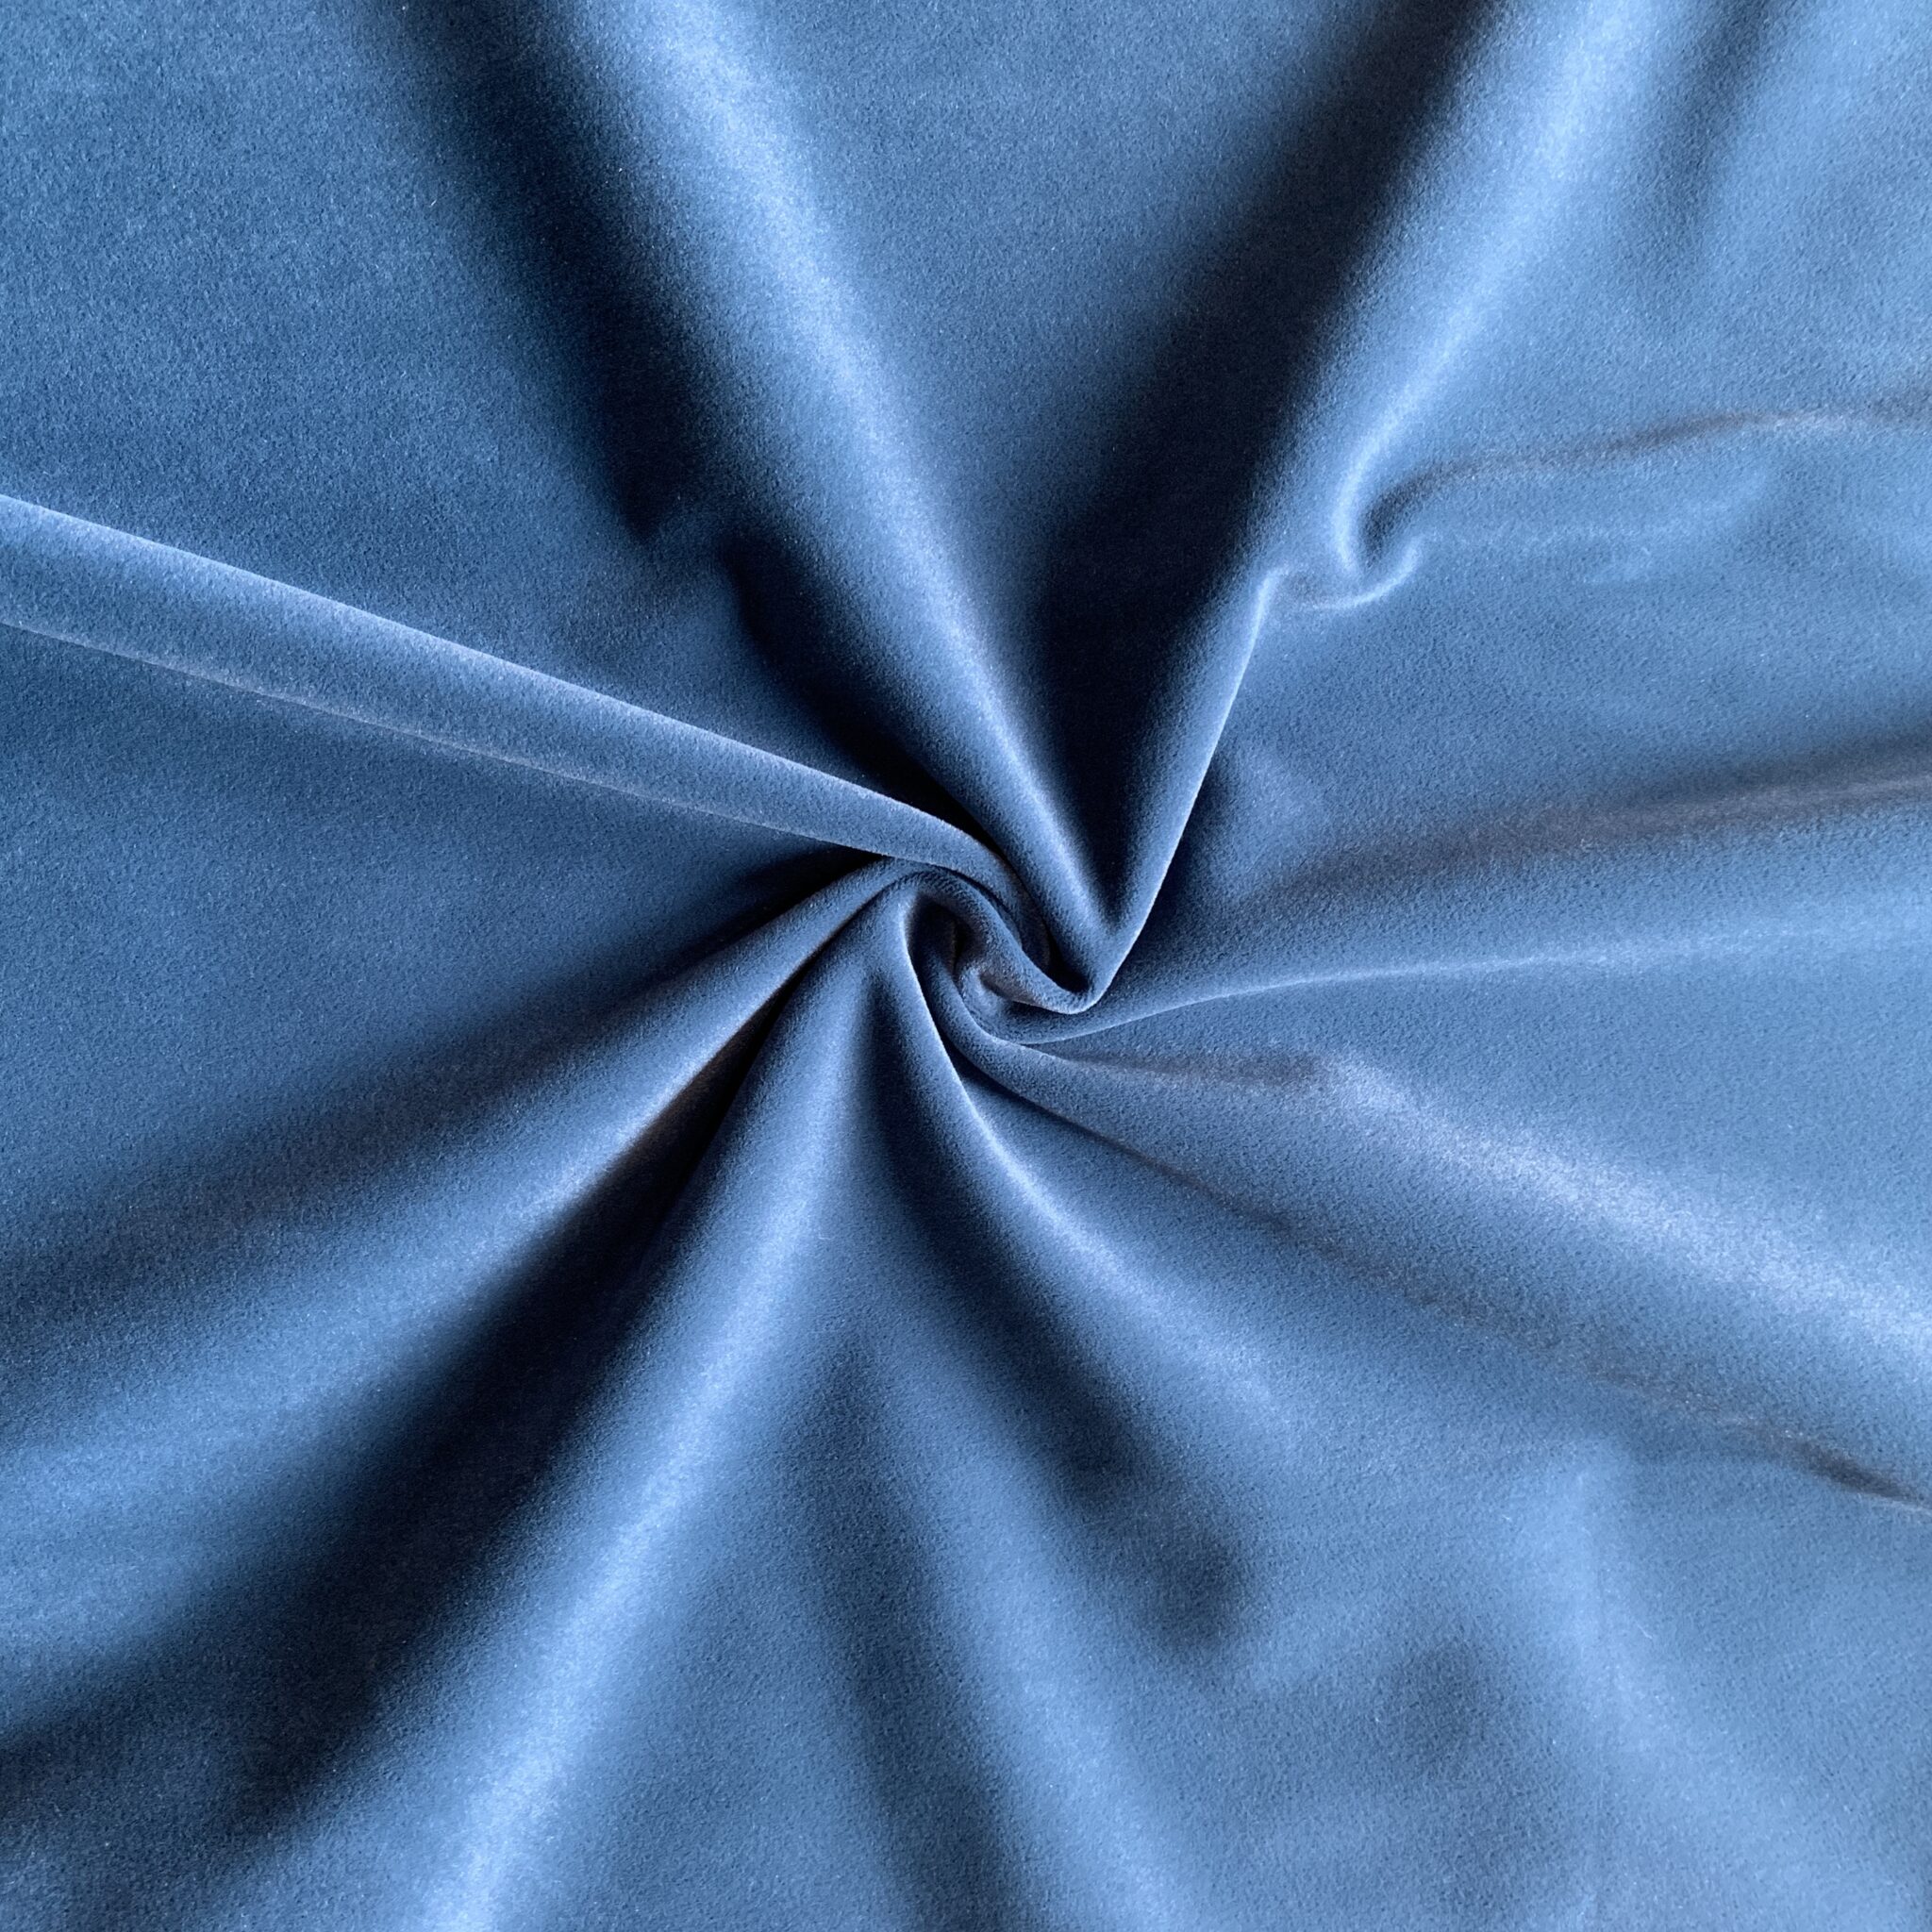 Polyester Super Soft Fabric Archives - High Quality Fabric and Yarn